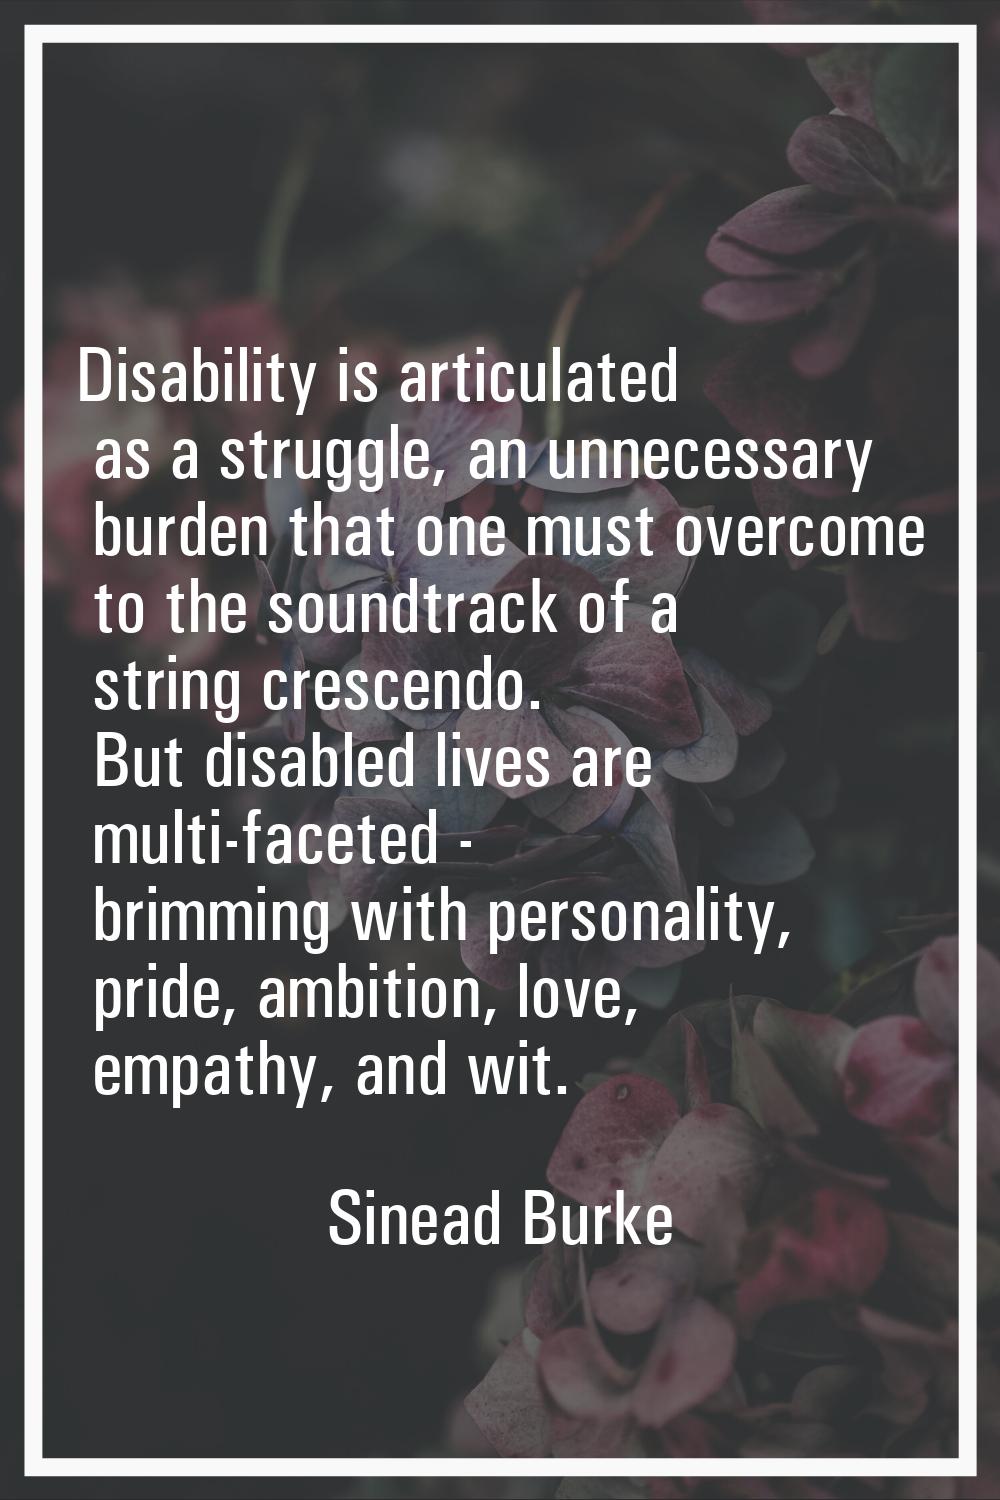 Disability is articulated as a struggle, an unnecessary burden that one must overcome to the soundt